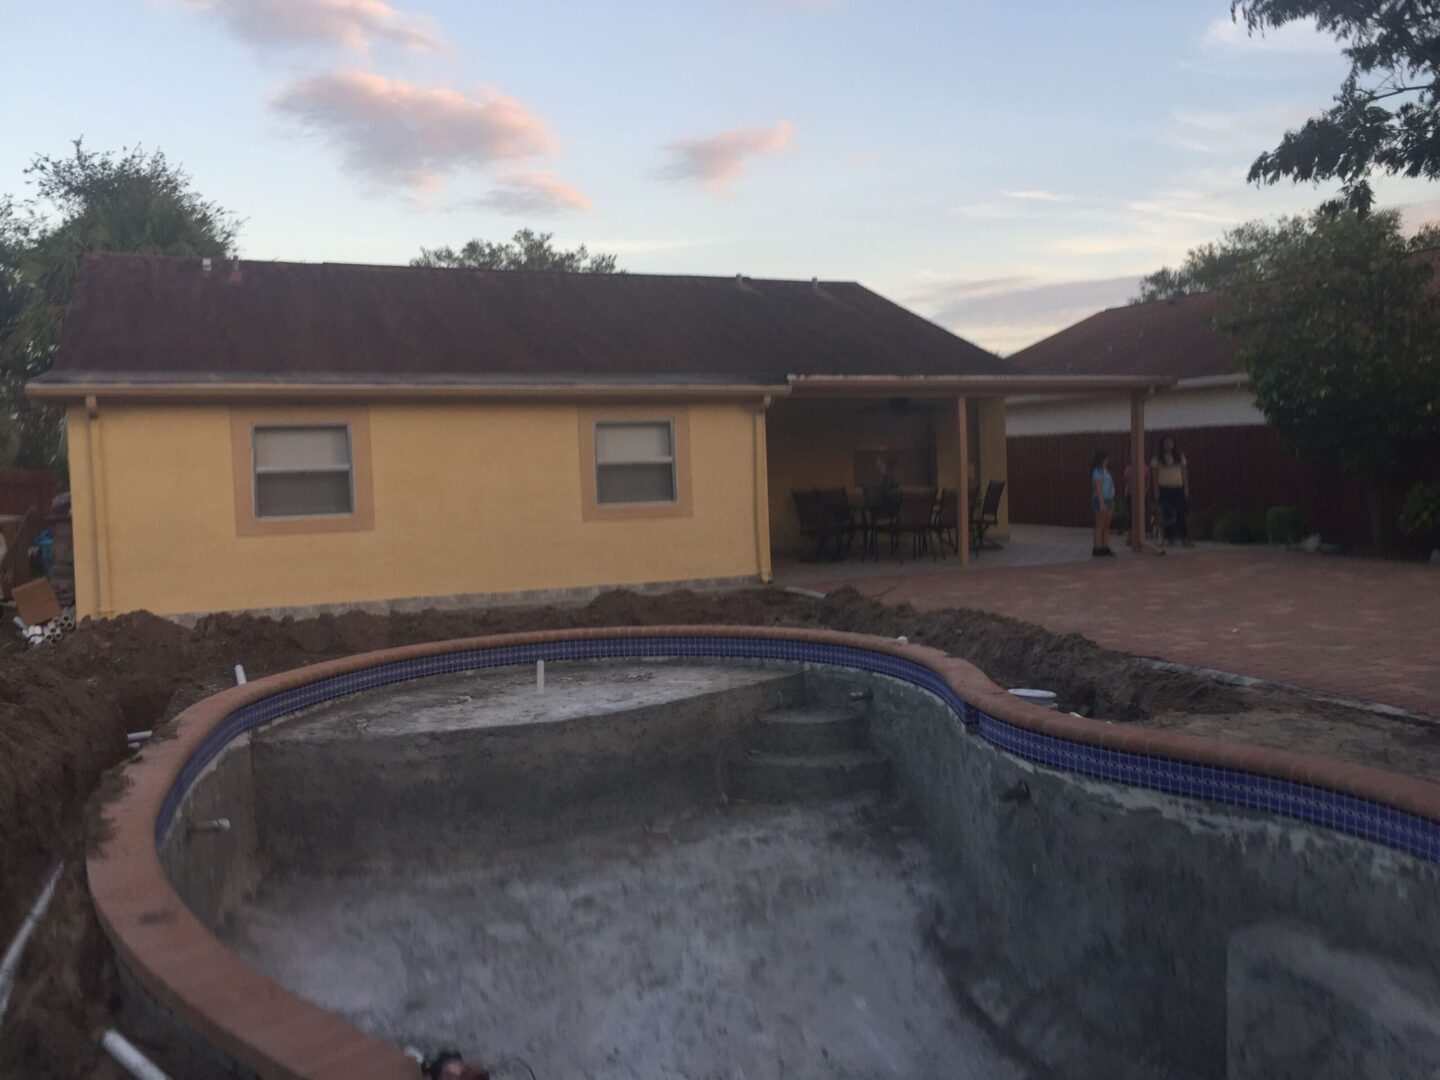 An outdoor home pool